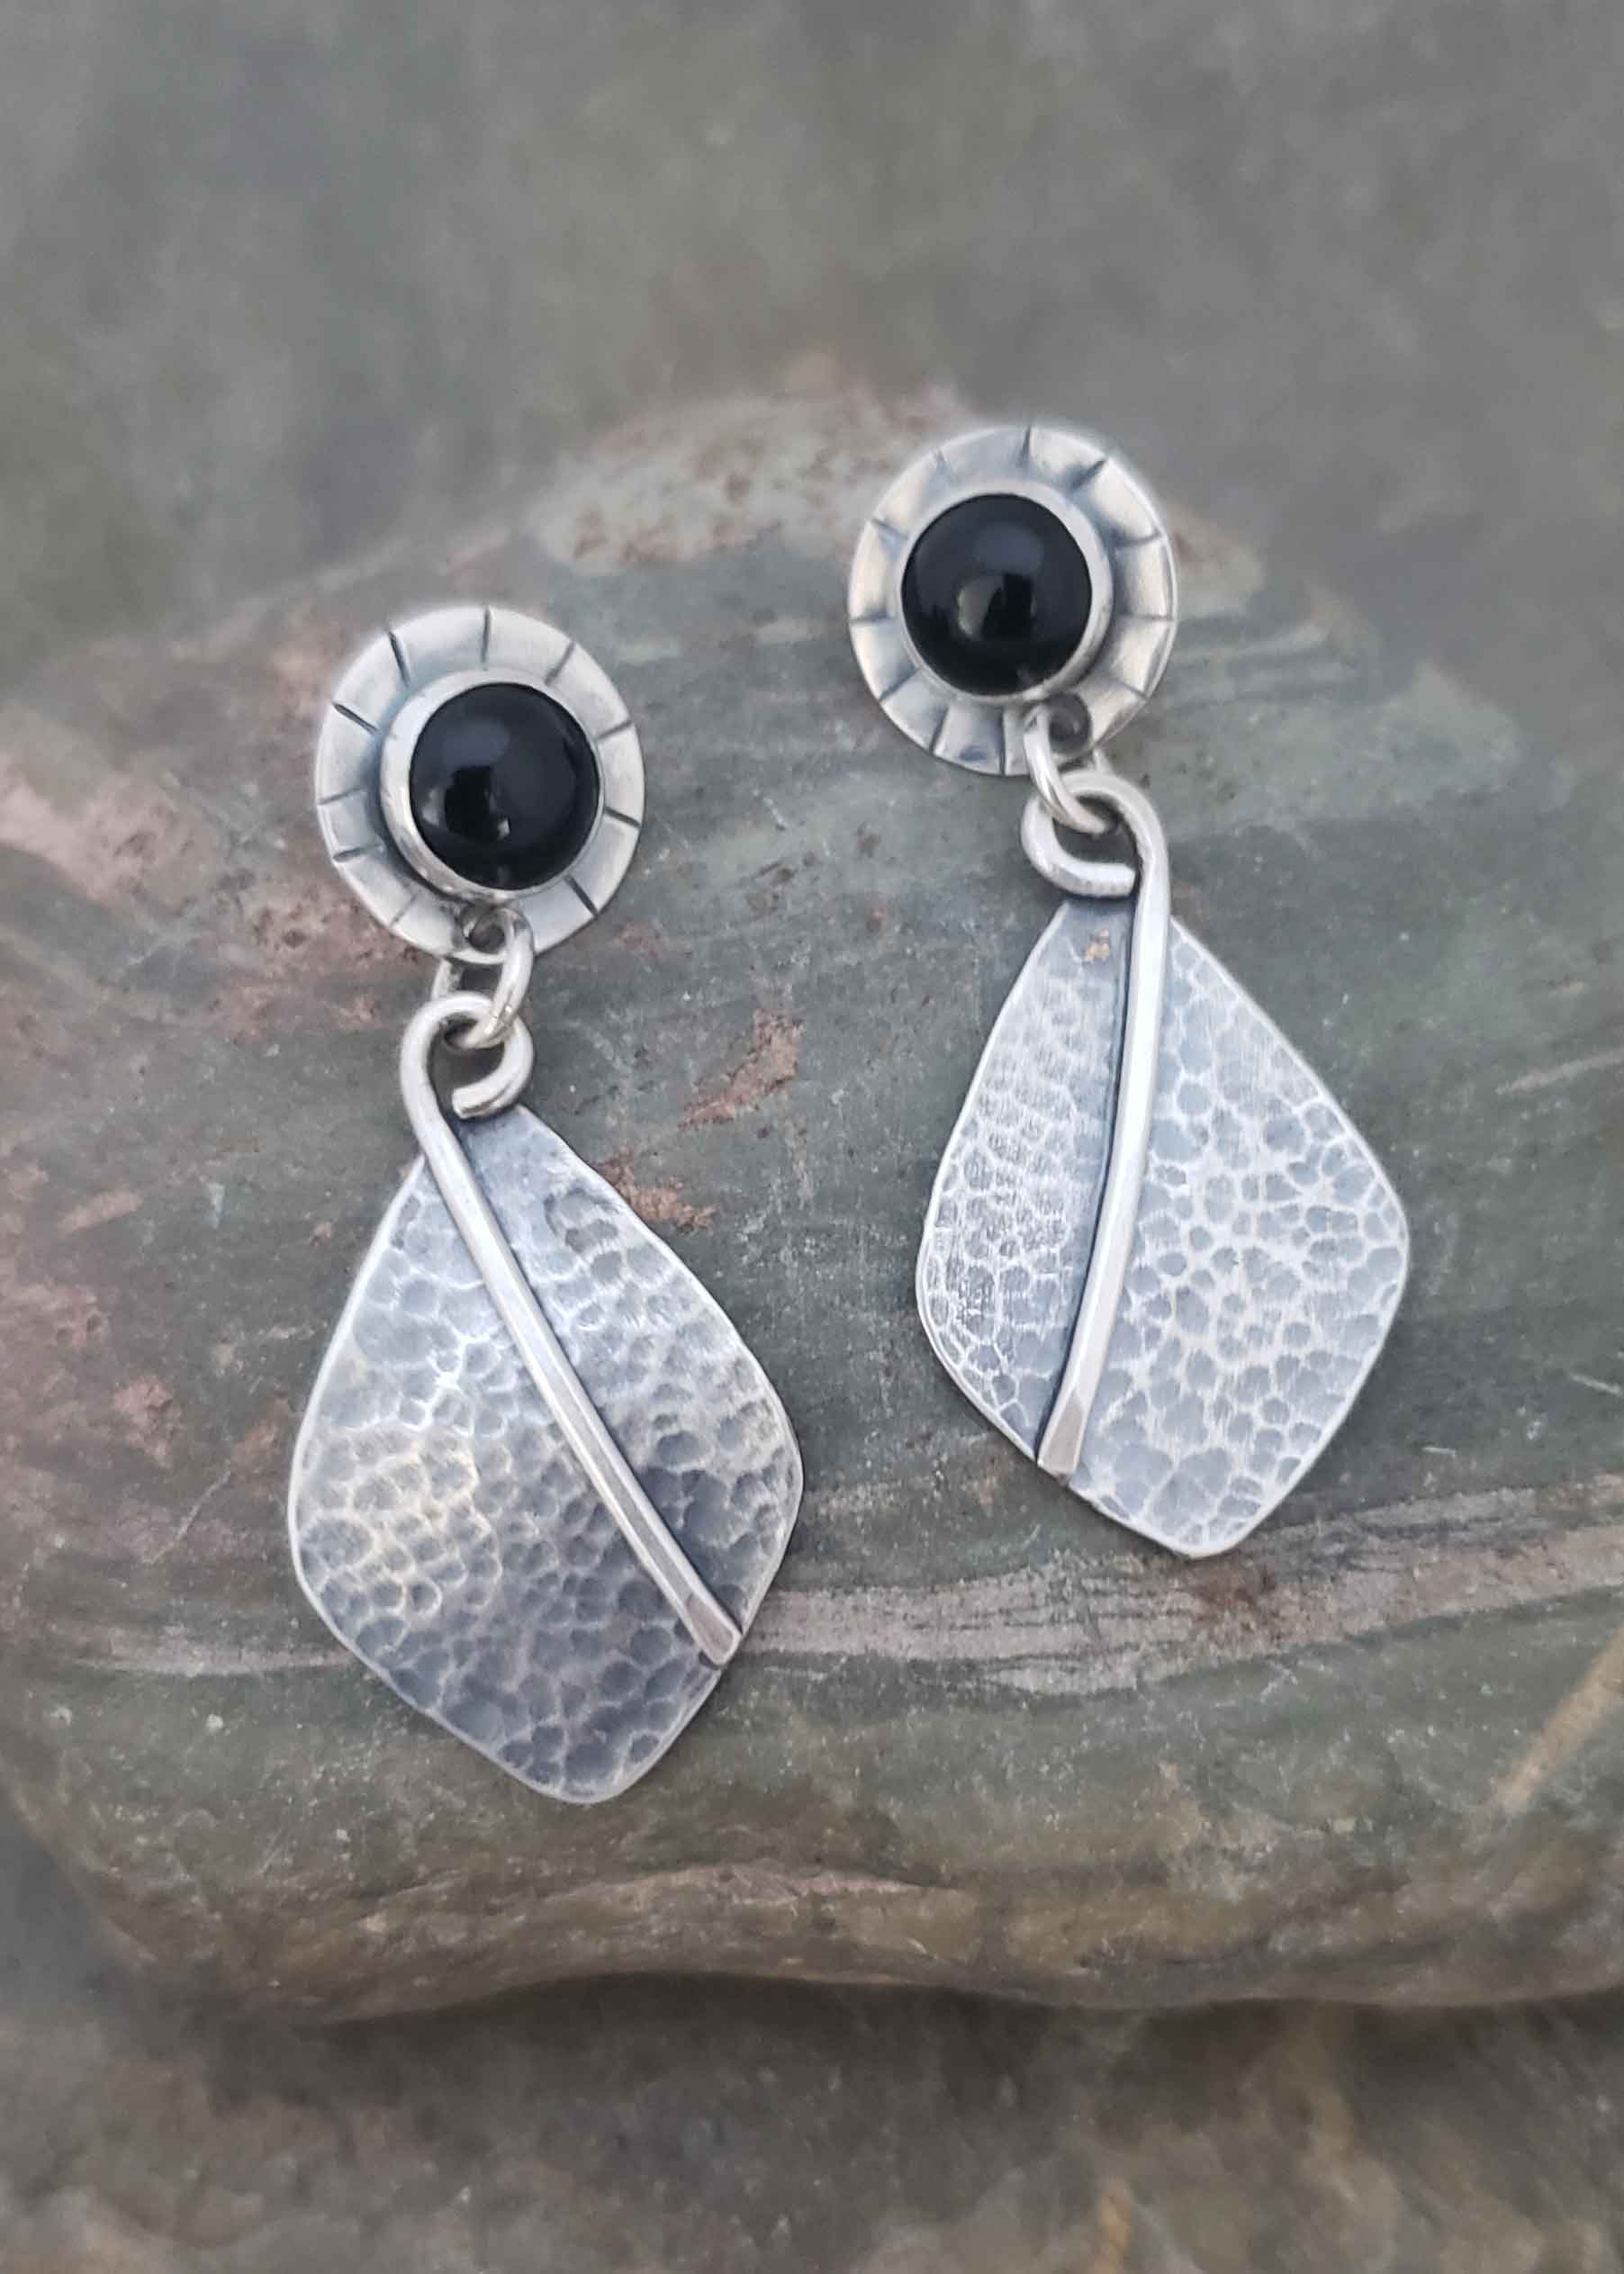 New Moon - silver and black onyx post earrings.